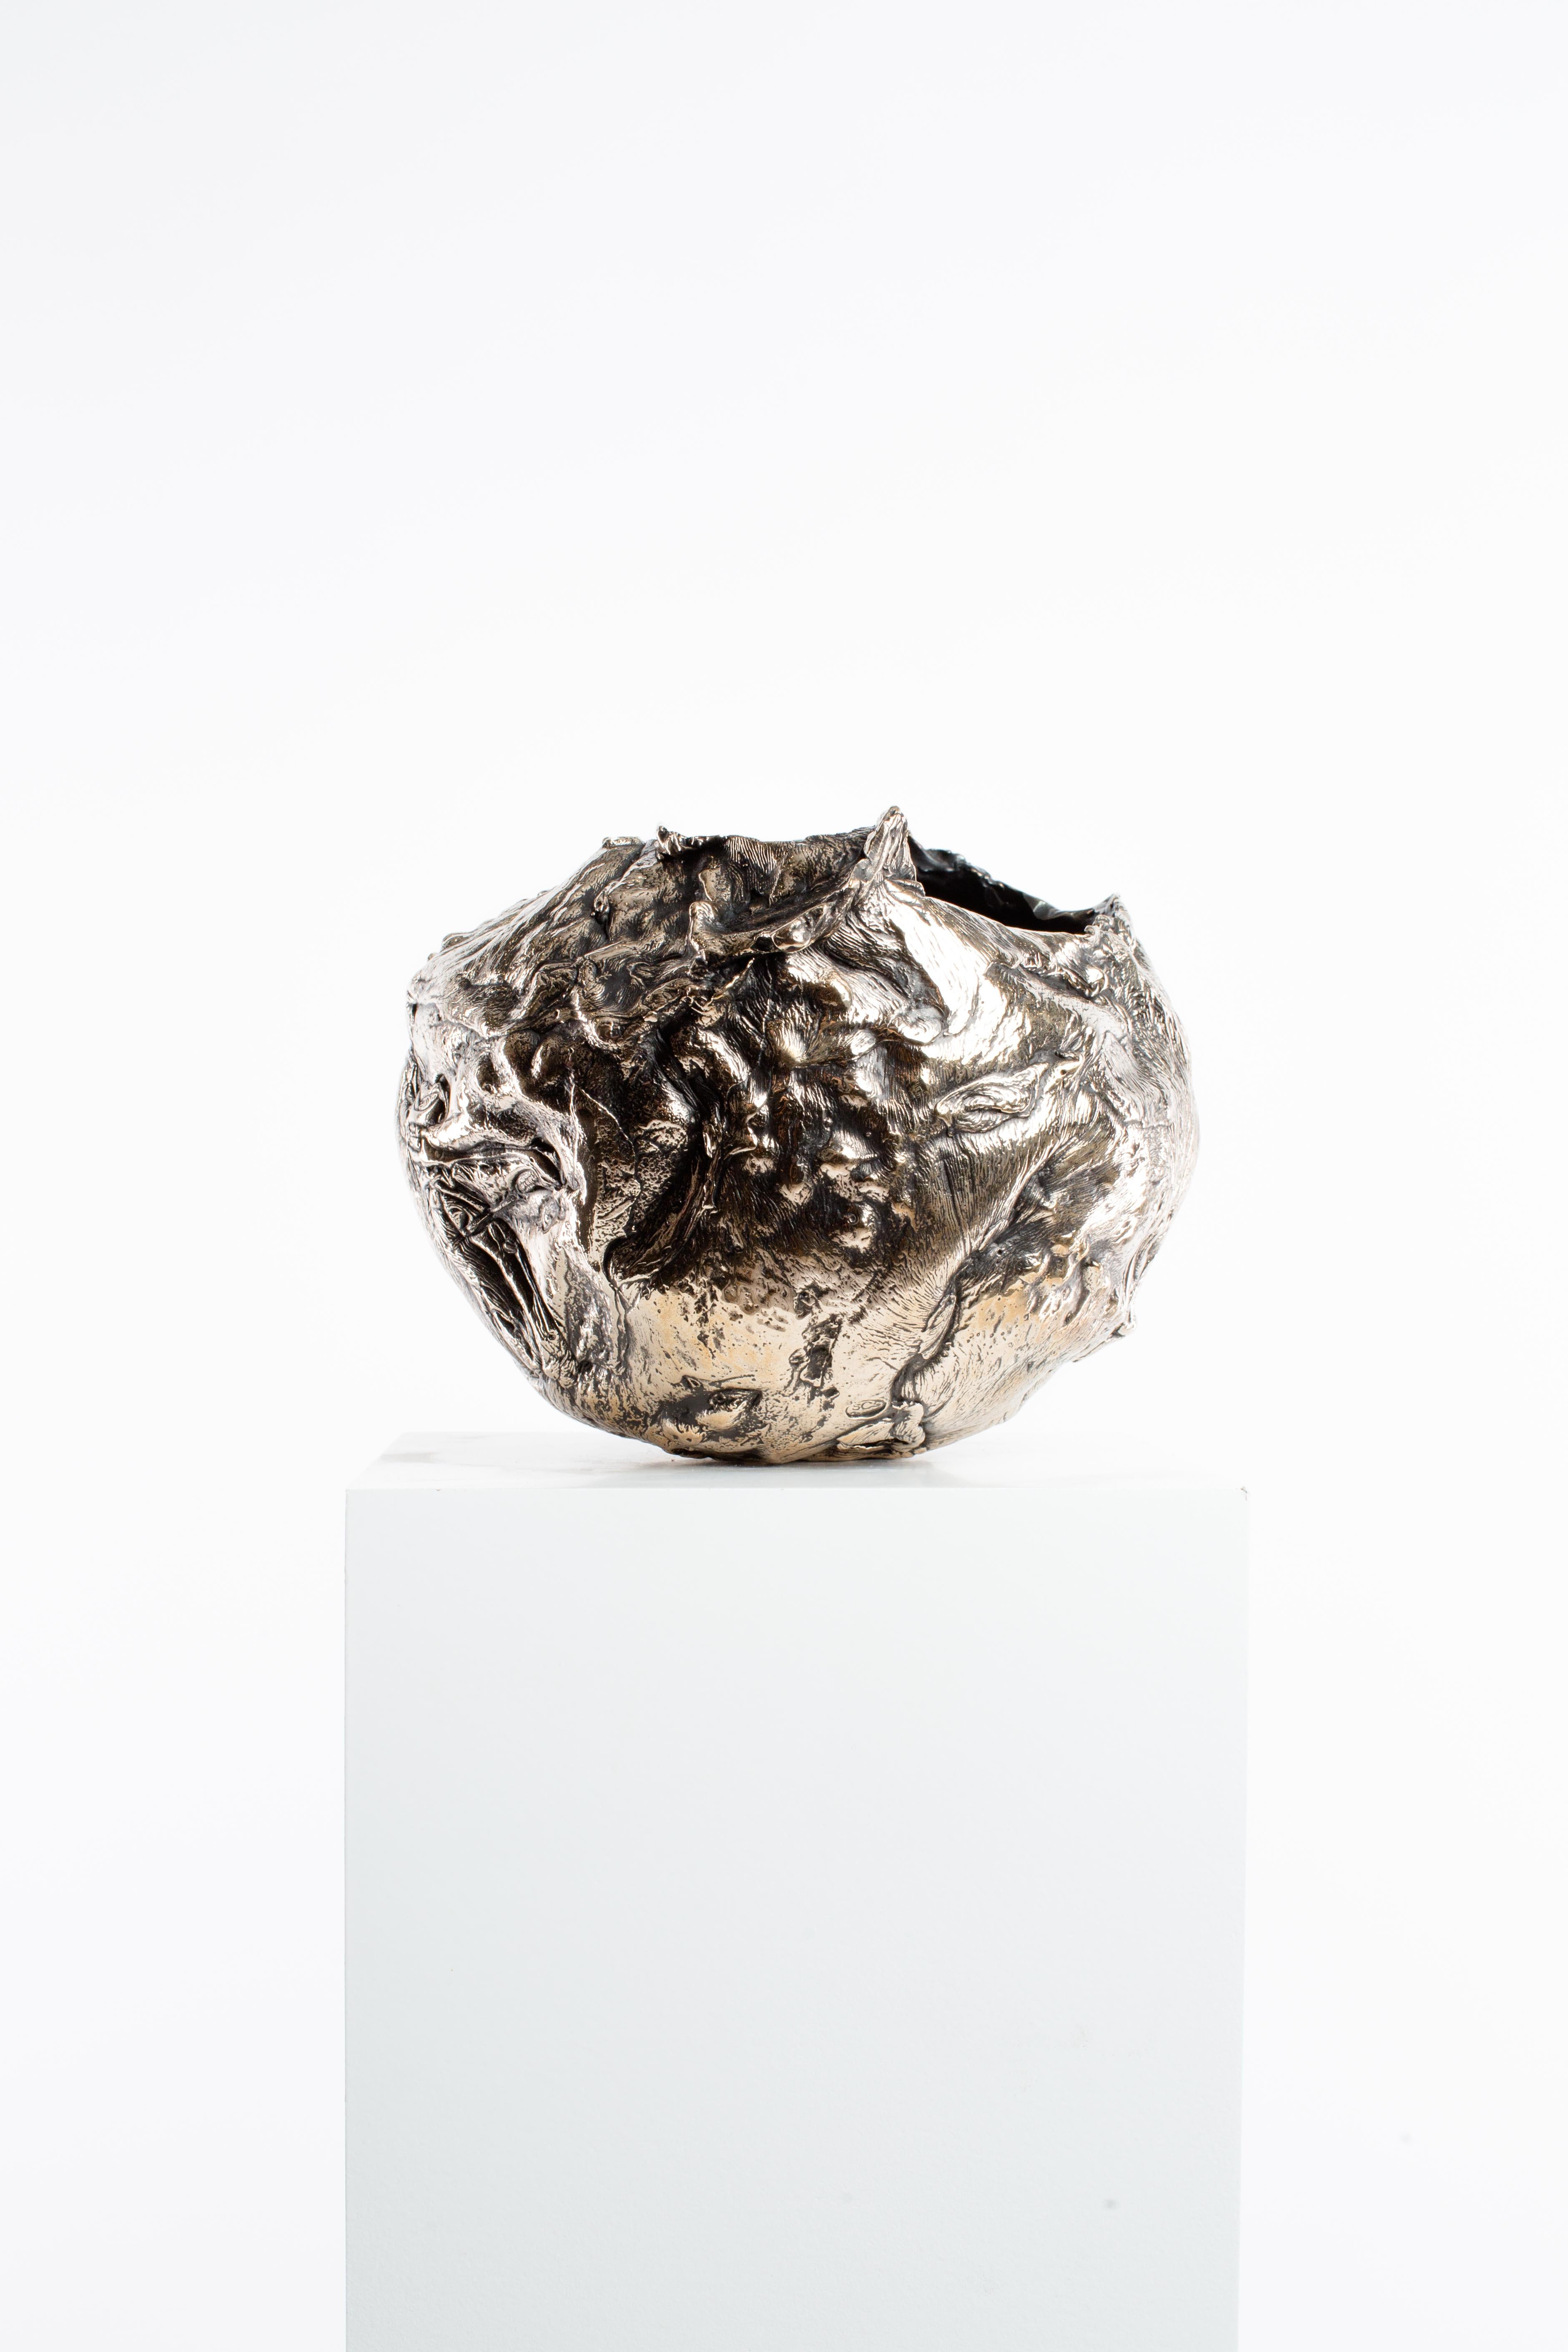 Polished, Bronze, Patina, Abstract, Contemporary, Modern, Sculpture, Vessel 2